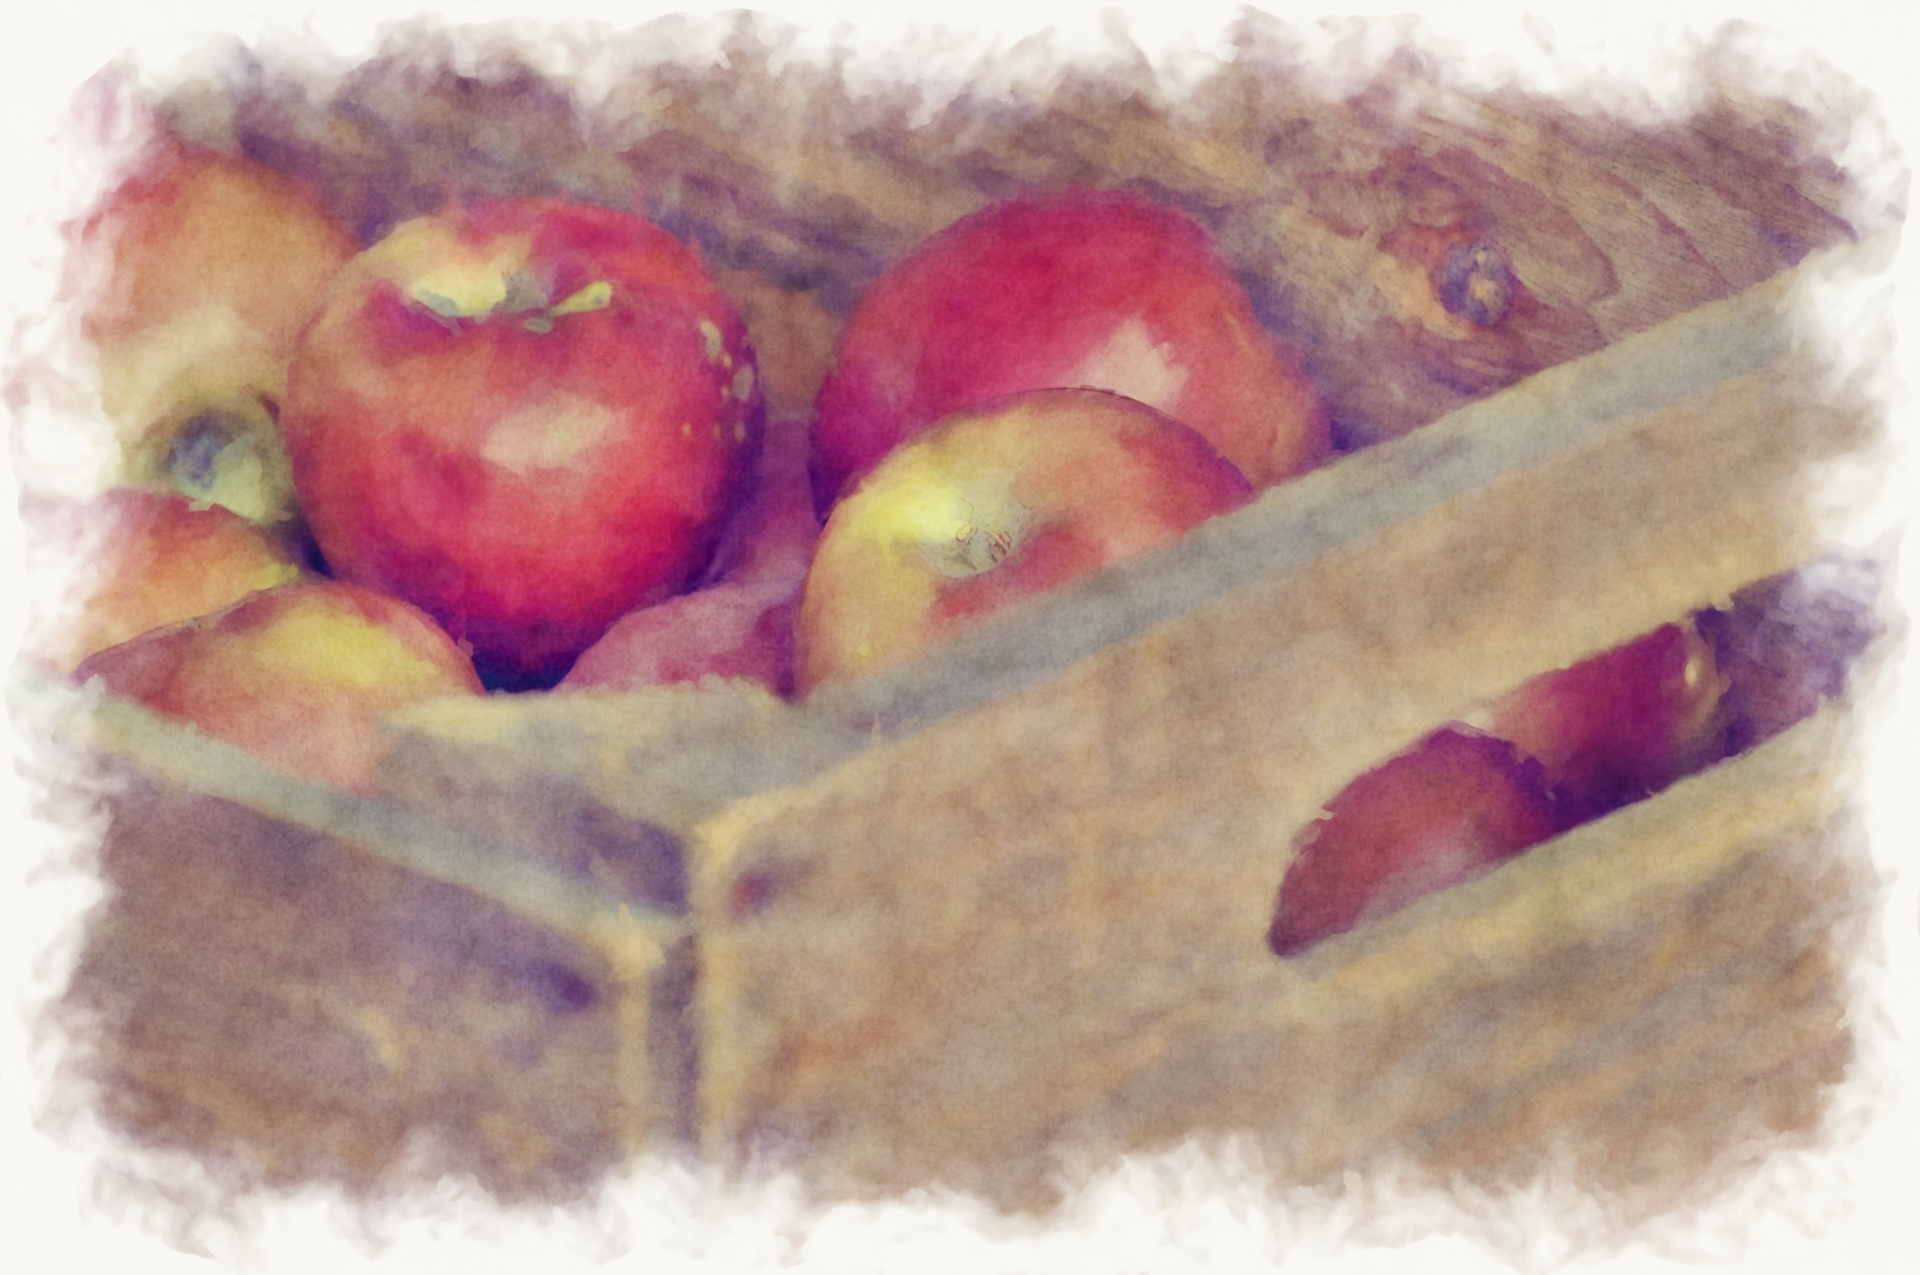 apple apples crate free photo